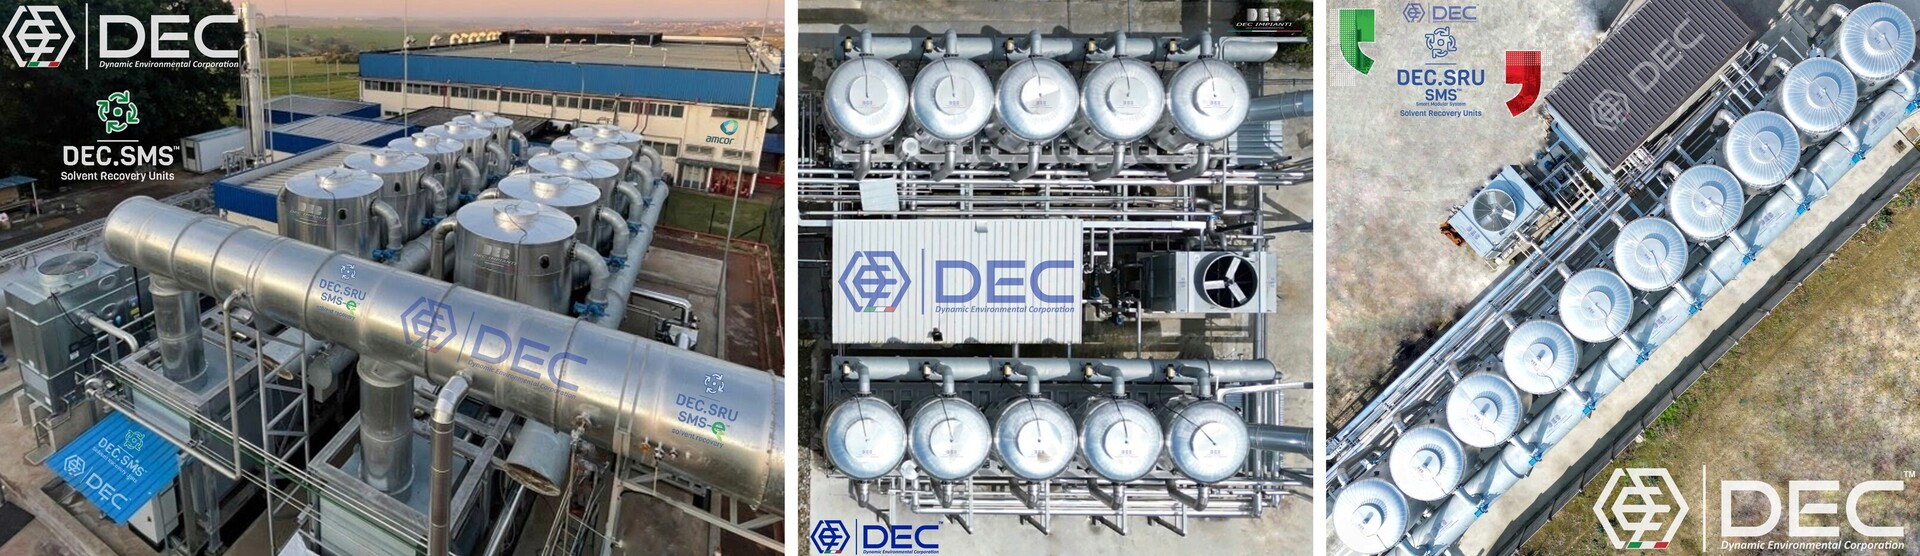 DEC, DEC IMPIANTI, DEC HOLDING, DEC SERVICE, DEC ENGINEERING, DEC AUTOMATION, DEC LAB, DEC ANALYTICS, DEC.SMS, SMS, SRU, Smart Modular System System, VOC emission control, solvent recovery, VOC recovery, VOC abatement, VOC emission control technology, VOC abatement systems, air pollution control, solvent recovery systems, environmental compliance, VOC recovery system, solvent recovery unit, VOC recovery equipment, BAT, Best Available Technique, BREF, IED, Industrial Emissions Directive, solvent recovery equipment, solvent recycling, VOC capture, solvent reclamation, solvent purification, VOC treatment, solvent regeneration, distillation, solvent distillation, VOC recovery process, activated carbon, adsorbent, nitrogen, oxidizer, thermal oxidation, regenerative thermal oxidizer, LEL monitoring, solvent recovery for flexible packaging, flexible packaging, converting, engineering, supply, turnkey, sustainable, innovation, decarbonization, low carbon emissions, green deal, carbon reduction, low carbon, carbon neutrality, net-zero emissions, greenhouse gas mitigation, carbon footprint, carbon capture and storage (CCS), GHG, CO2, energy efficiency, chemical recycling, recycling, sustainability solutions, sustainability, reclaiming, carbon offset, circular economy, climate change, climate policy, climate action, environmental challenges, sustainable development, sustainability roadmap, ESG, TBL